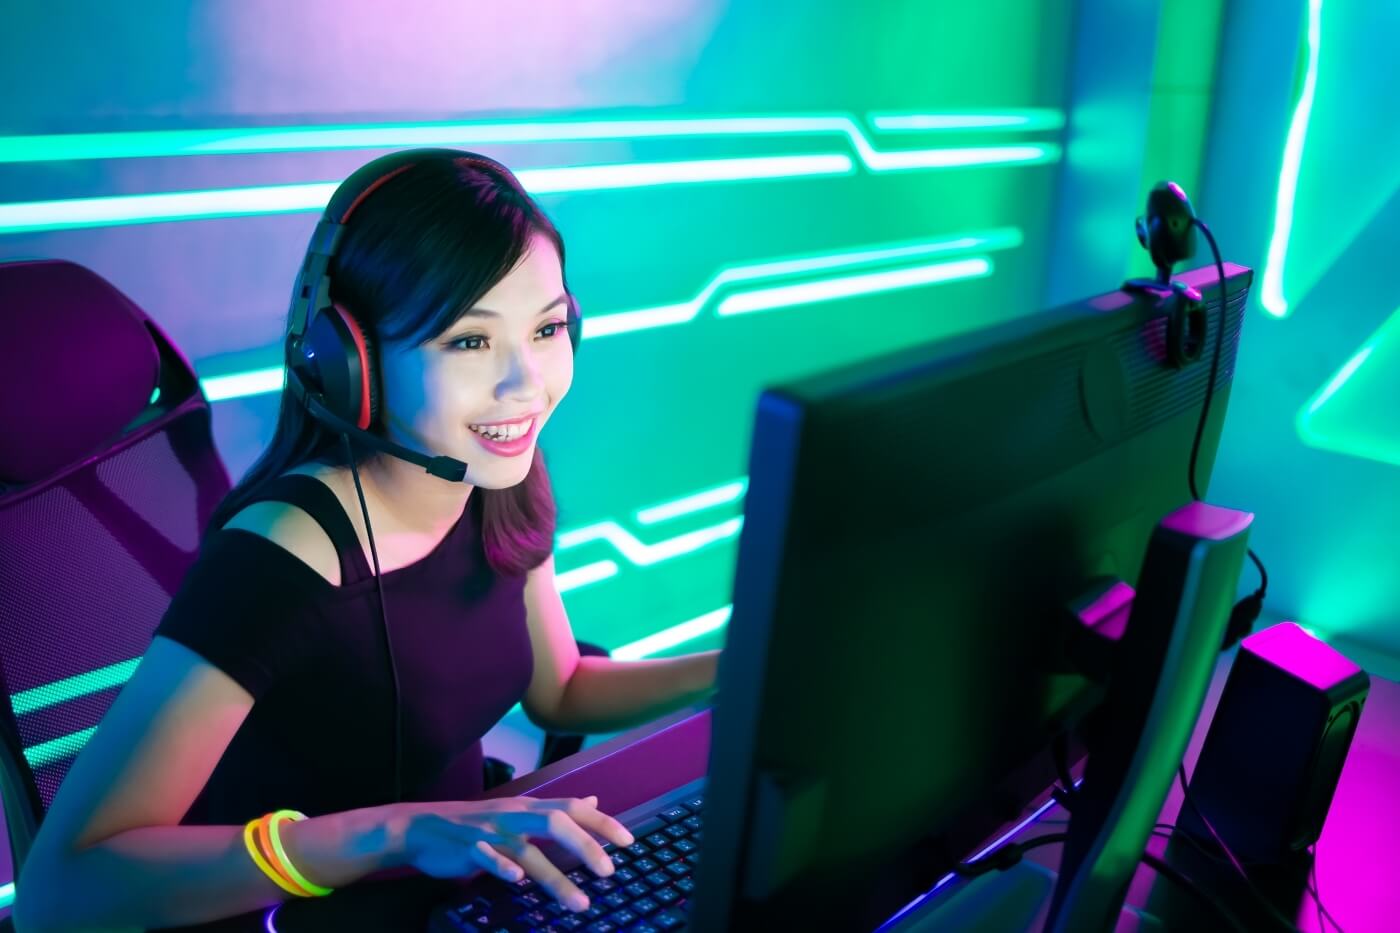 Online gaming can lead to lasting friendships, and much more